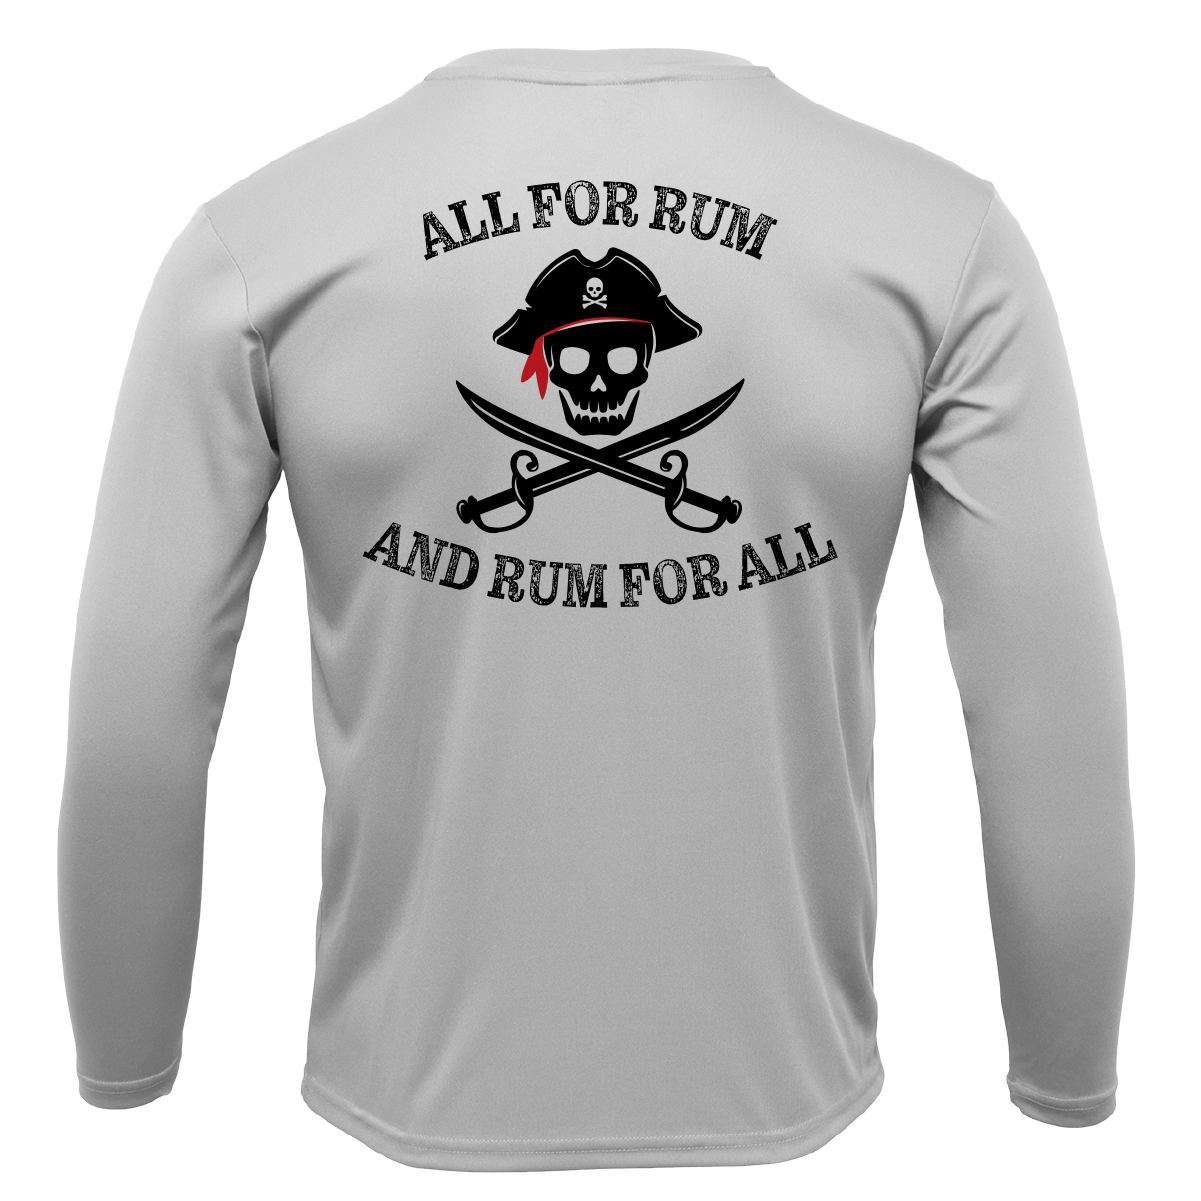 Michigan Freshwater Born "All For Rum and Rum For All" Boy's Long Sleeve UPF 50+ Dry-Fit Shirt